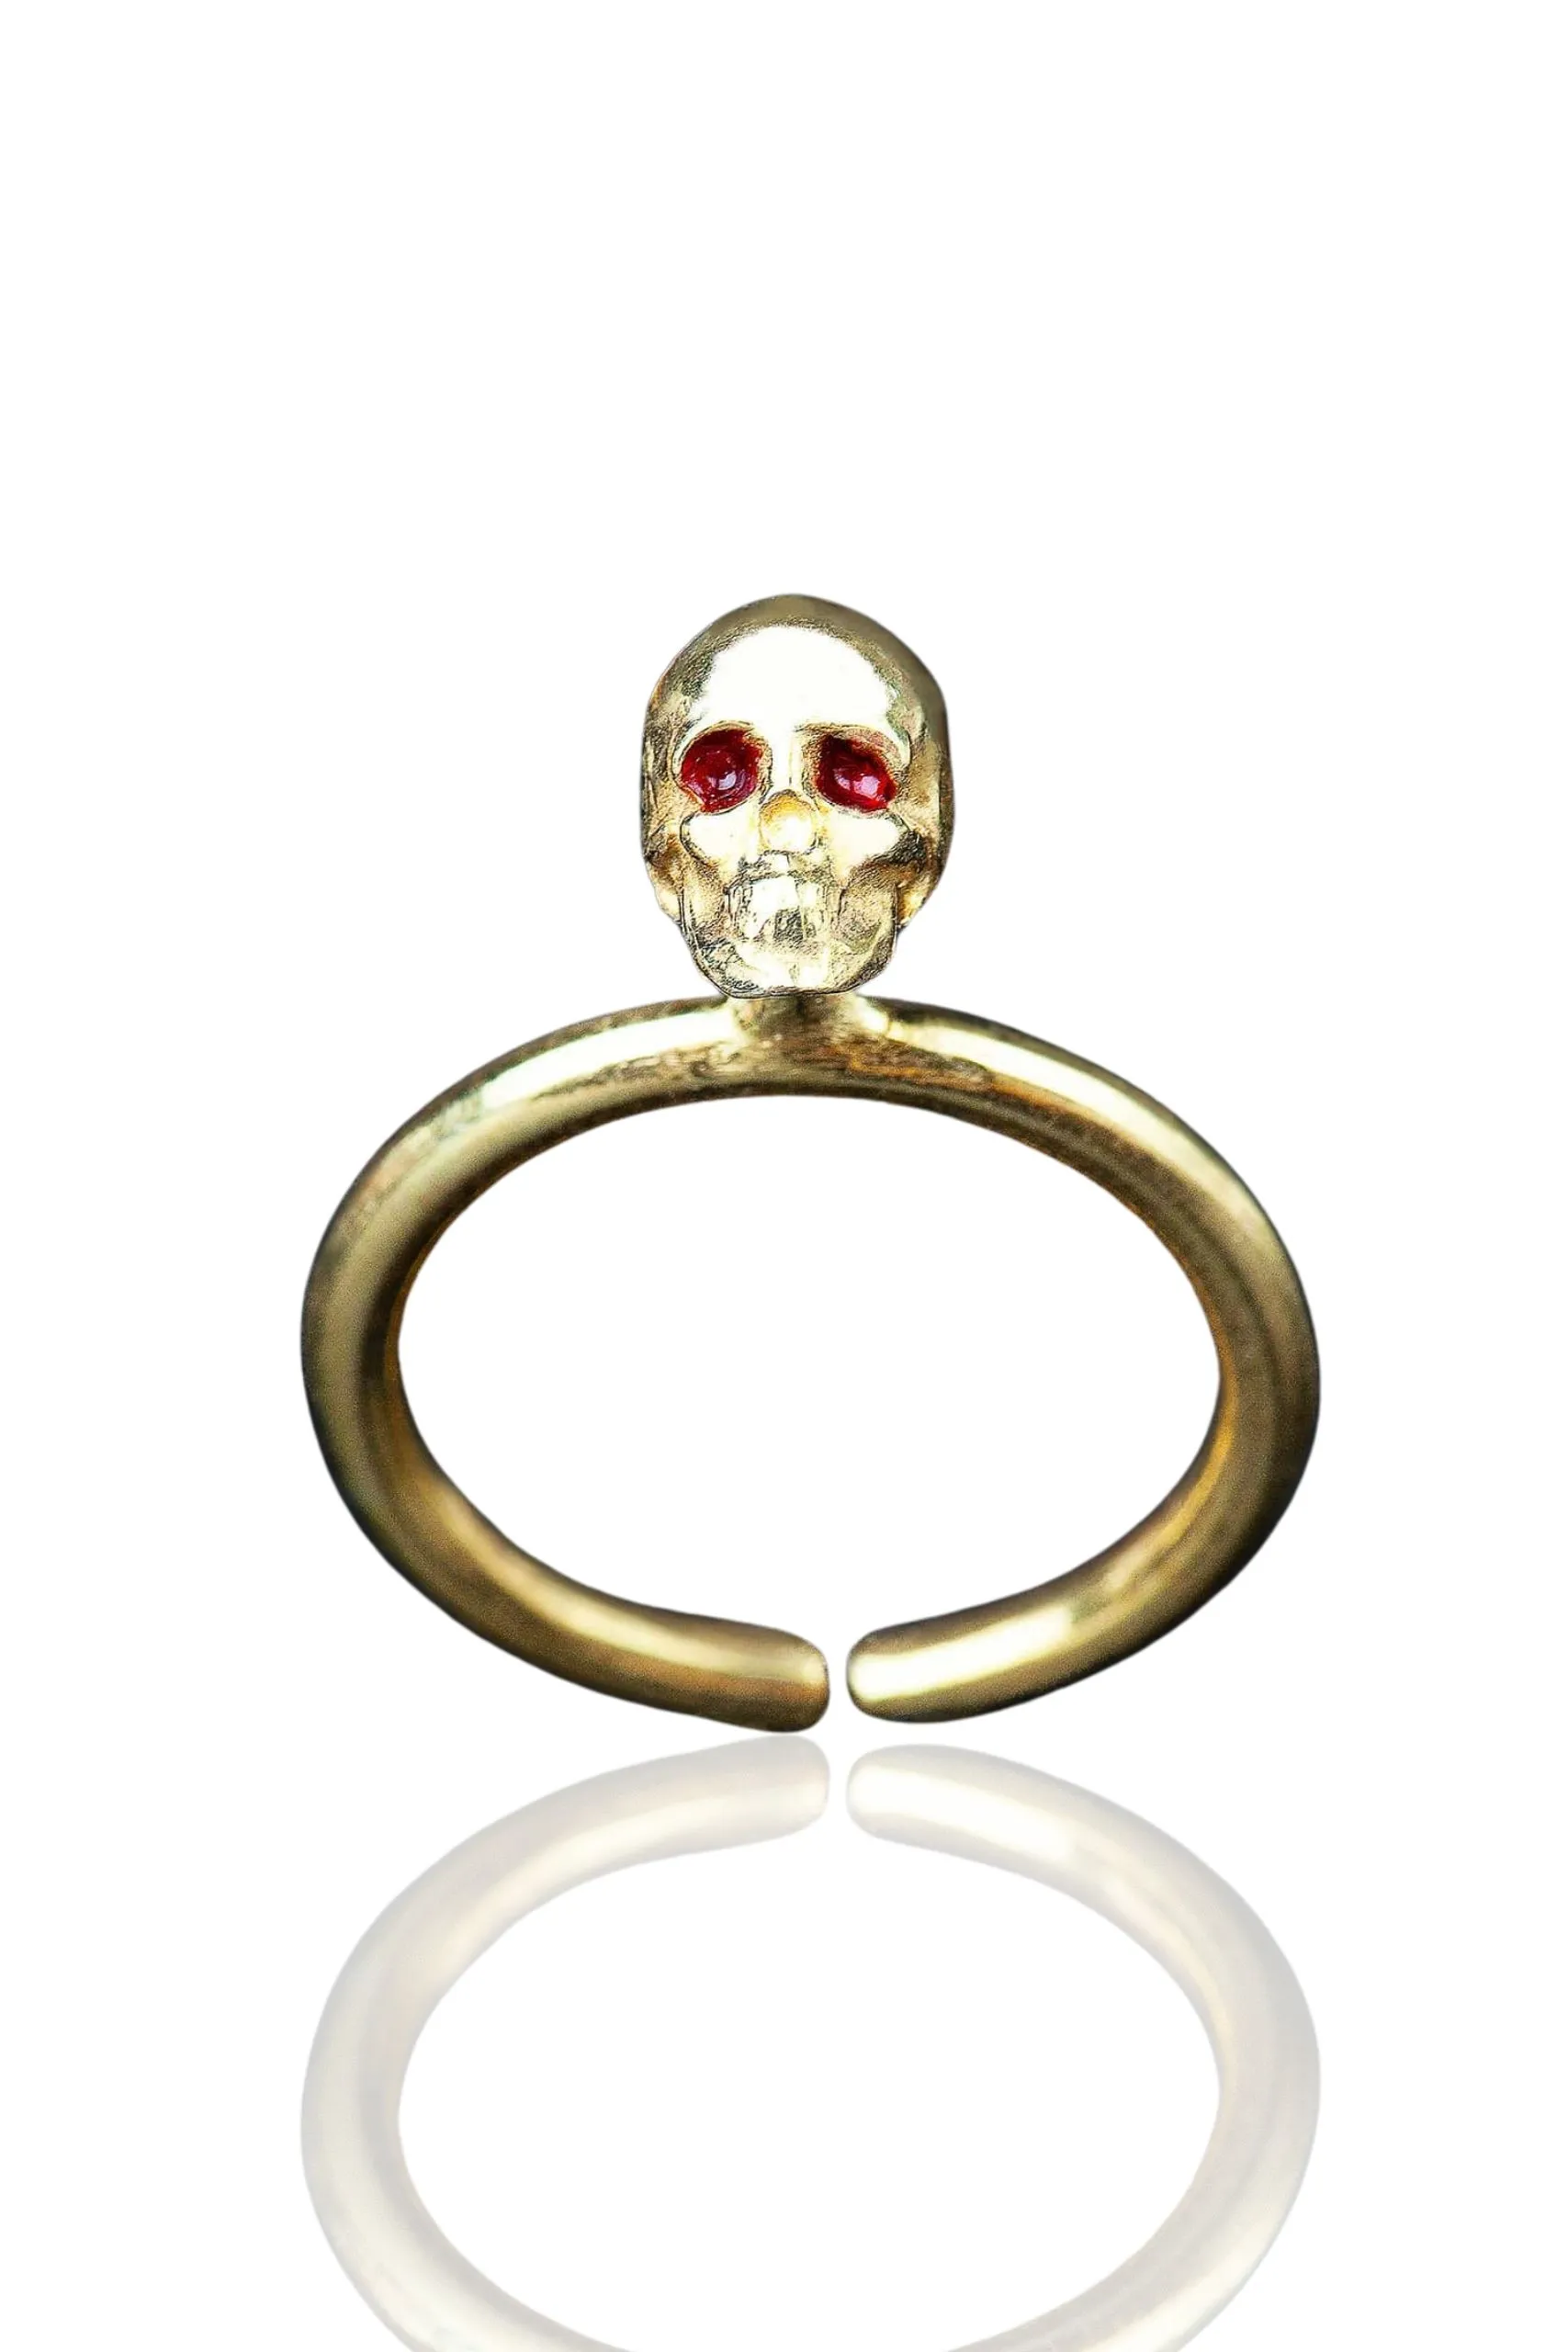 Handmade Jewellery | Scull gold plated silver ring with red enamel details main